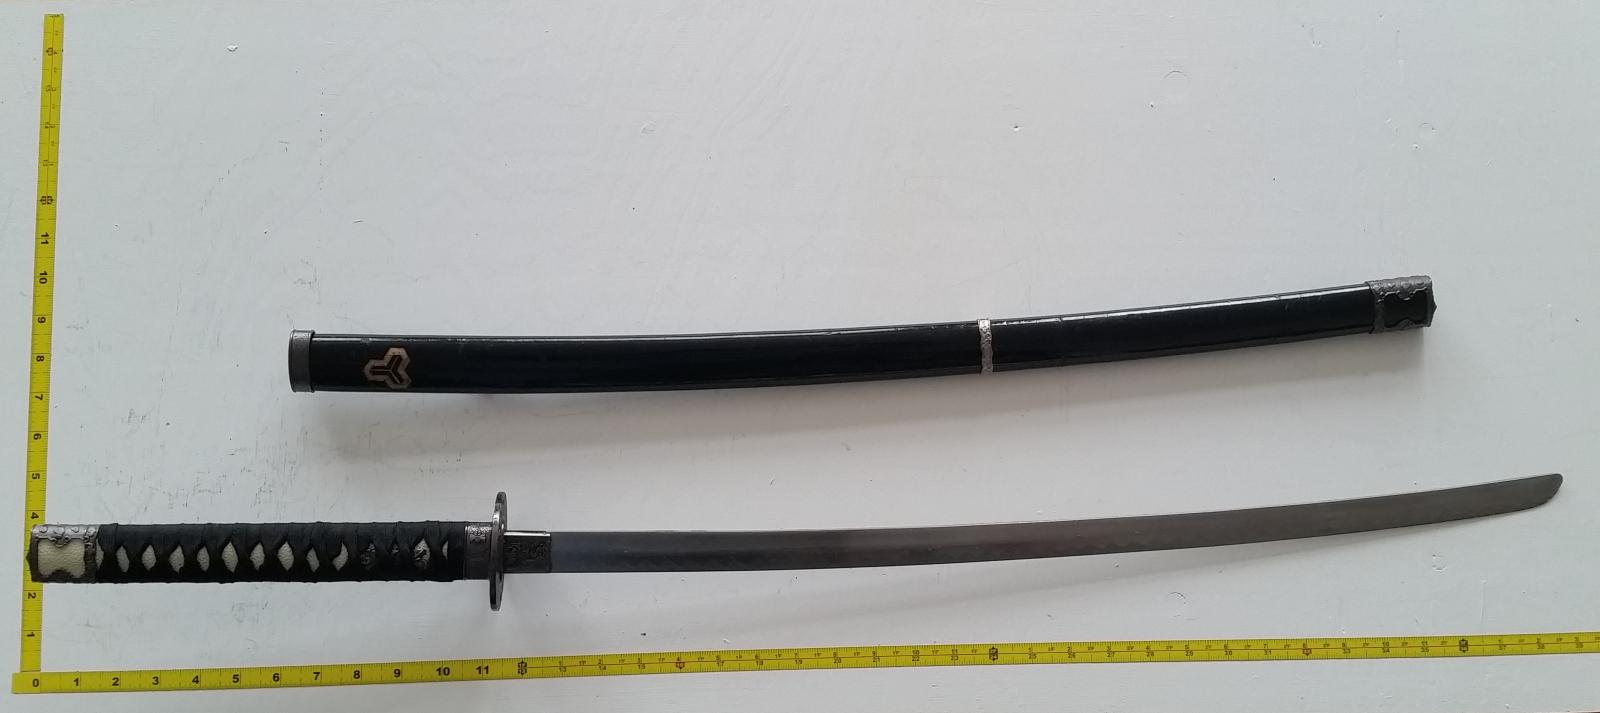 Large Katana with Sheath - NOT approved for blade-to-blade stage combat.